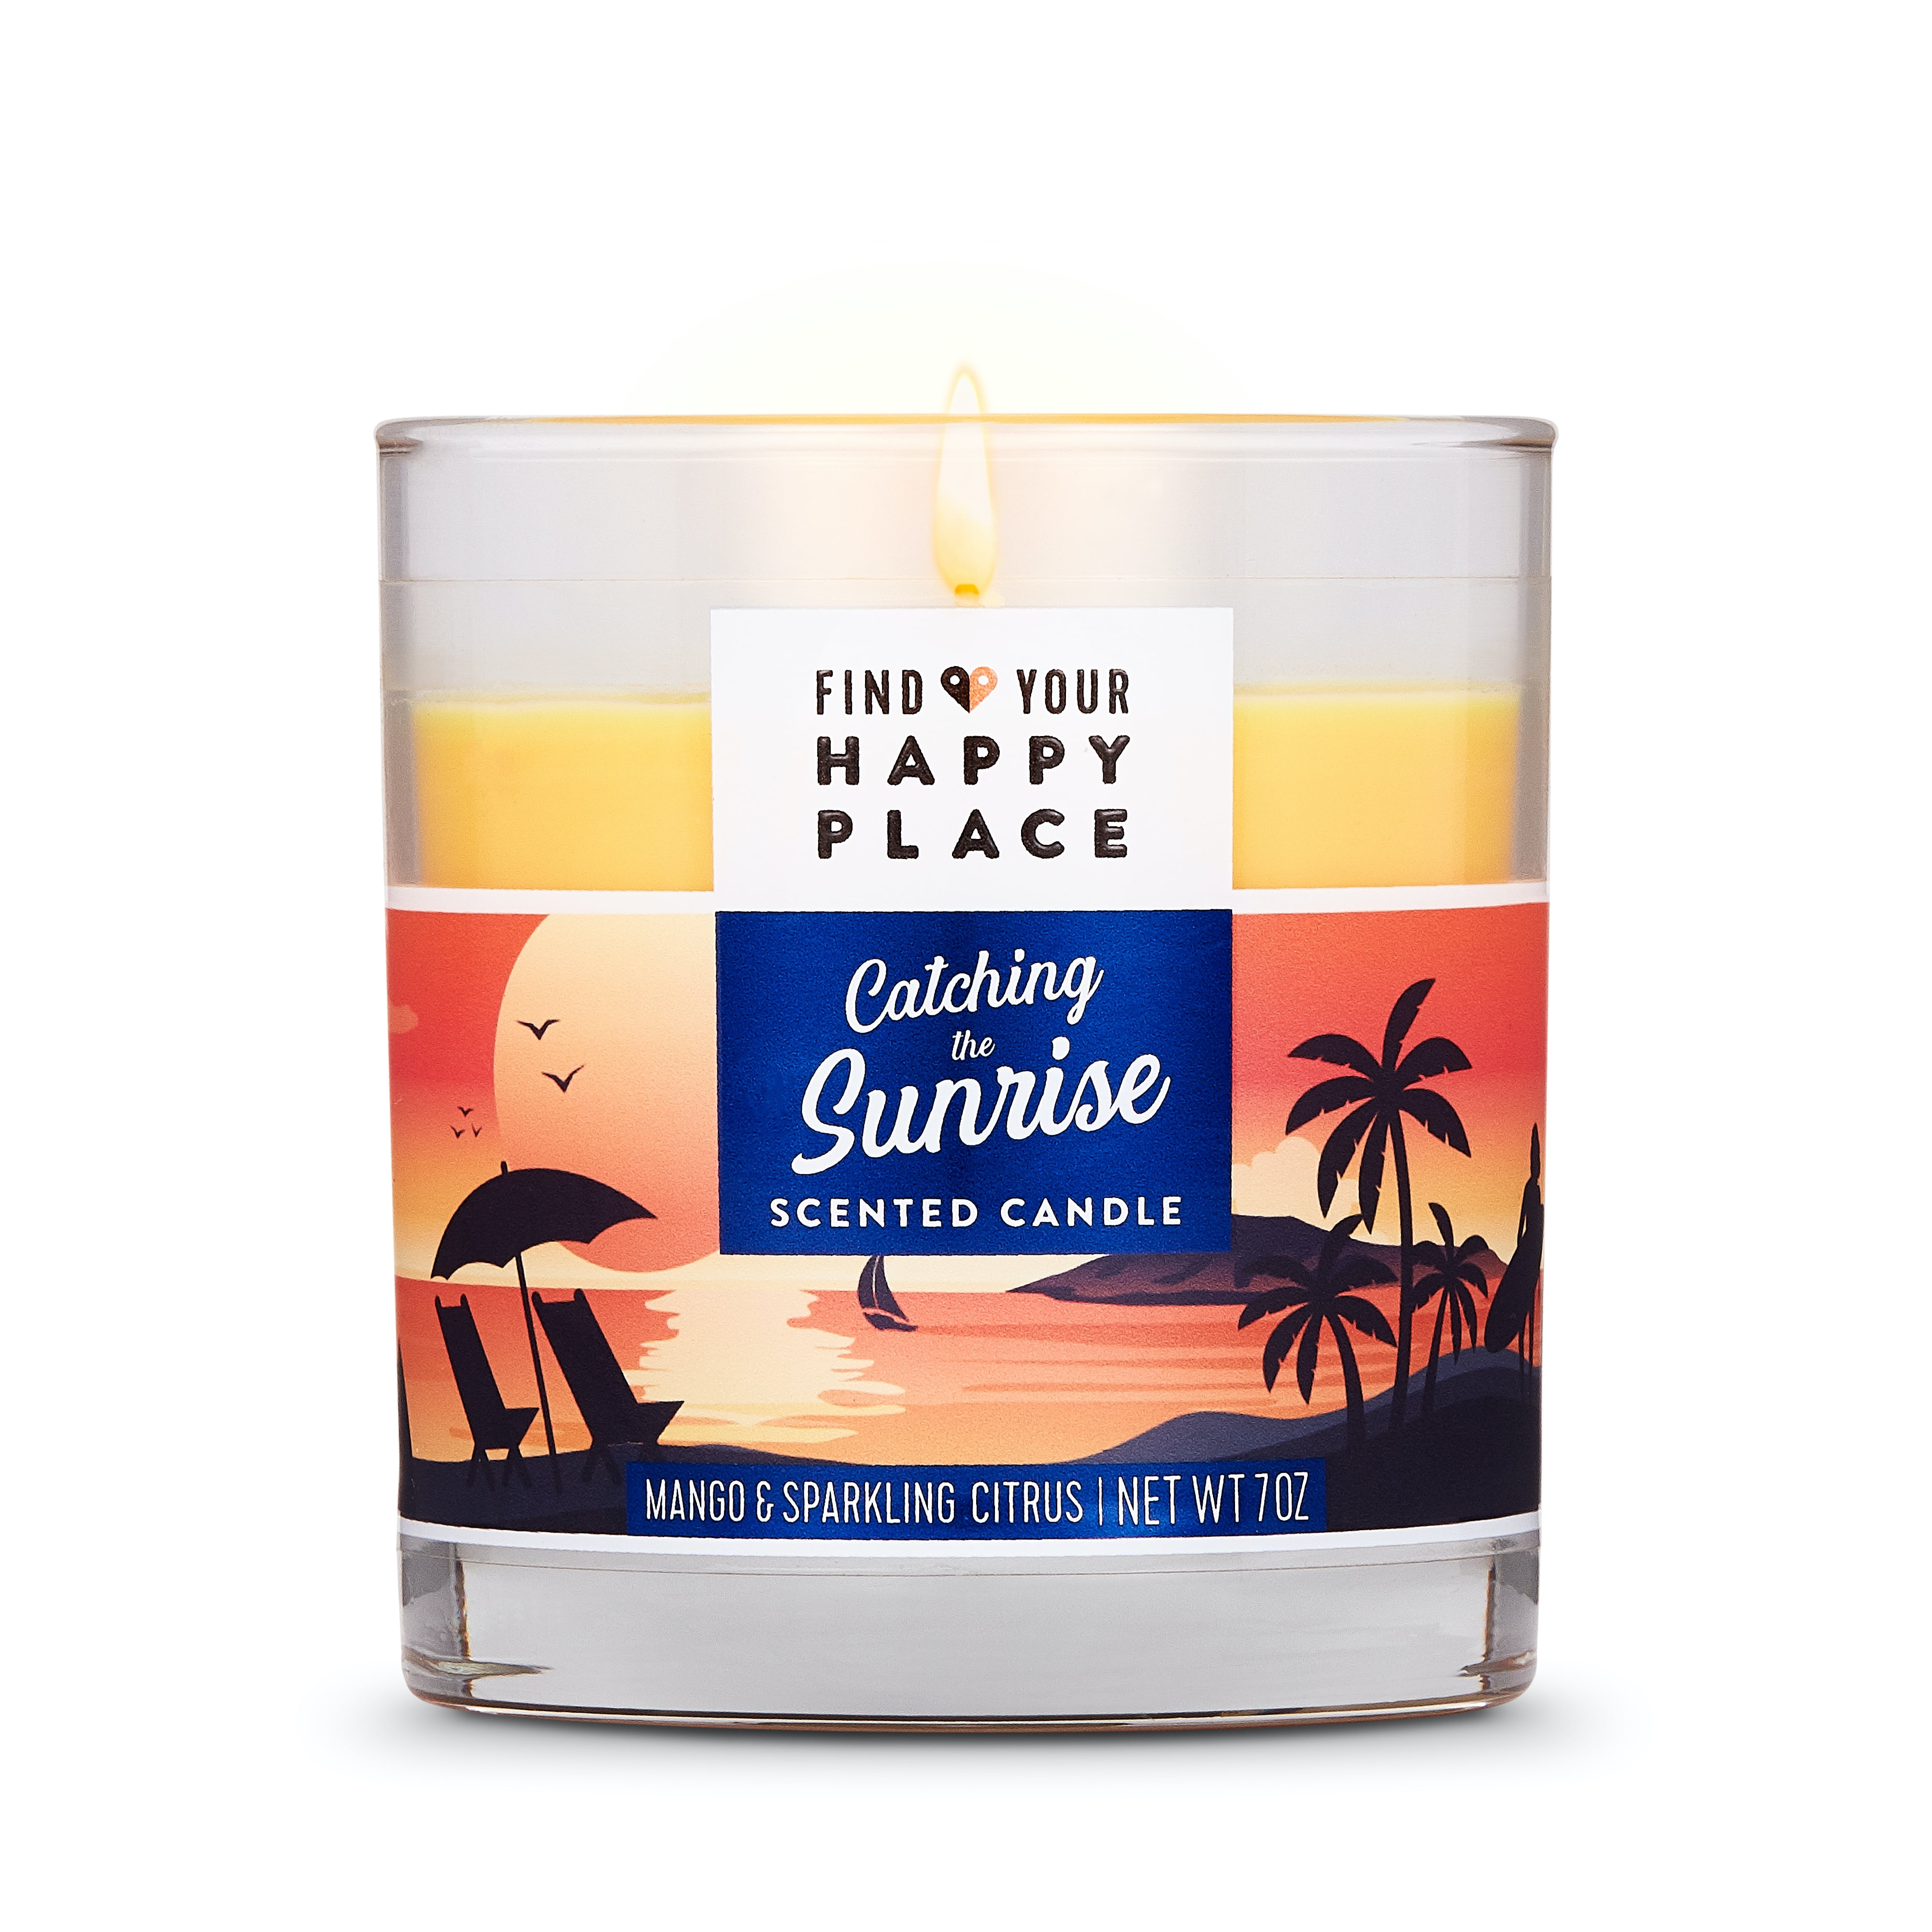 19 Value) Find Your Happy Place Home Essentials Scented Candle Holiday Gift  Set, Catching the Sunrise & Under the Starlit Sky, Mango & Sparkling Citrus  and Chamomile & Sandalwood, 2 Count 